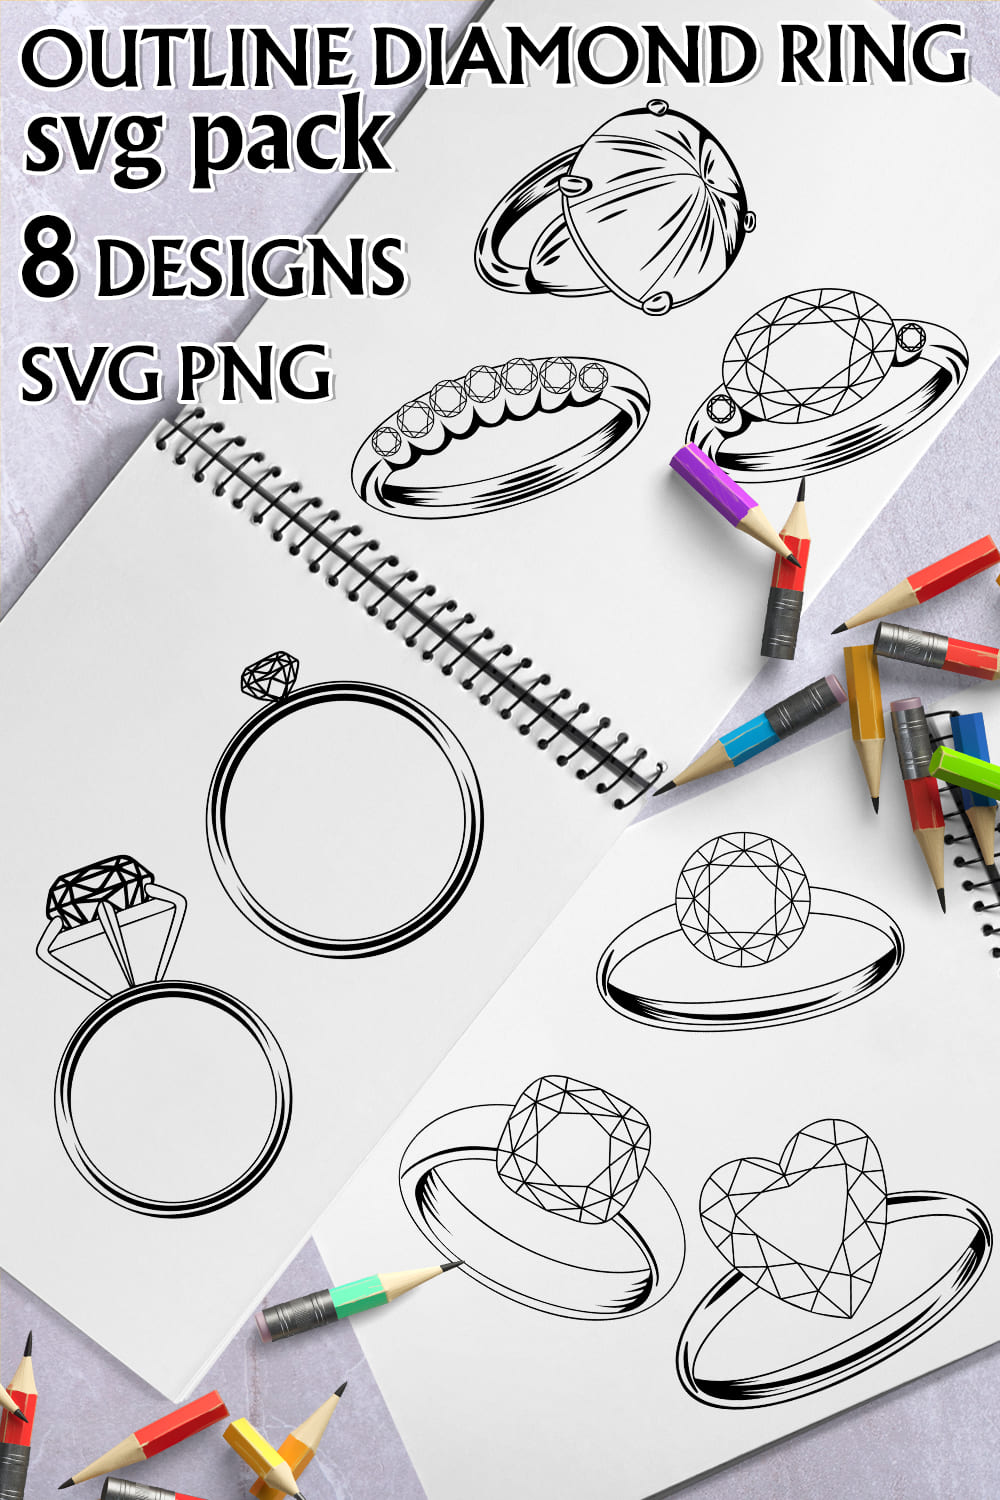 Outline Diamond Ring SVG - pinterest image preview.